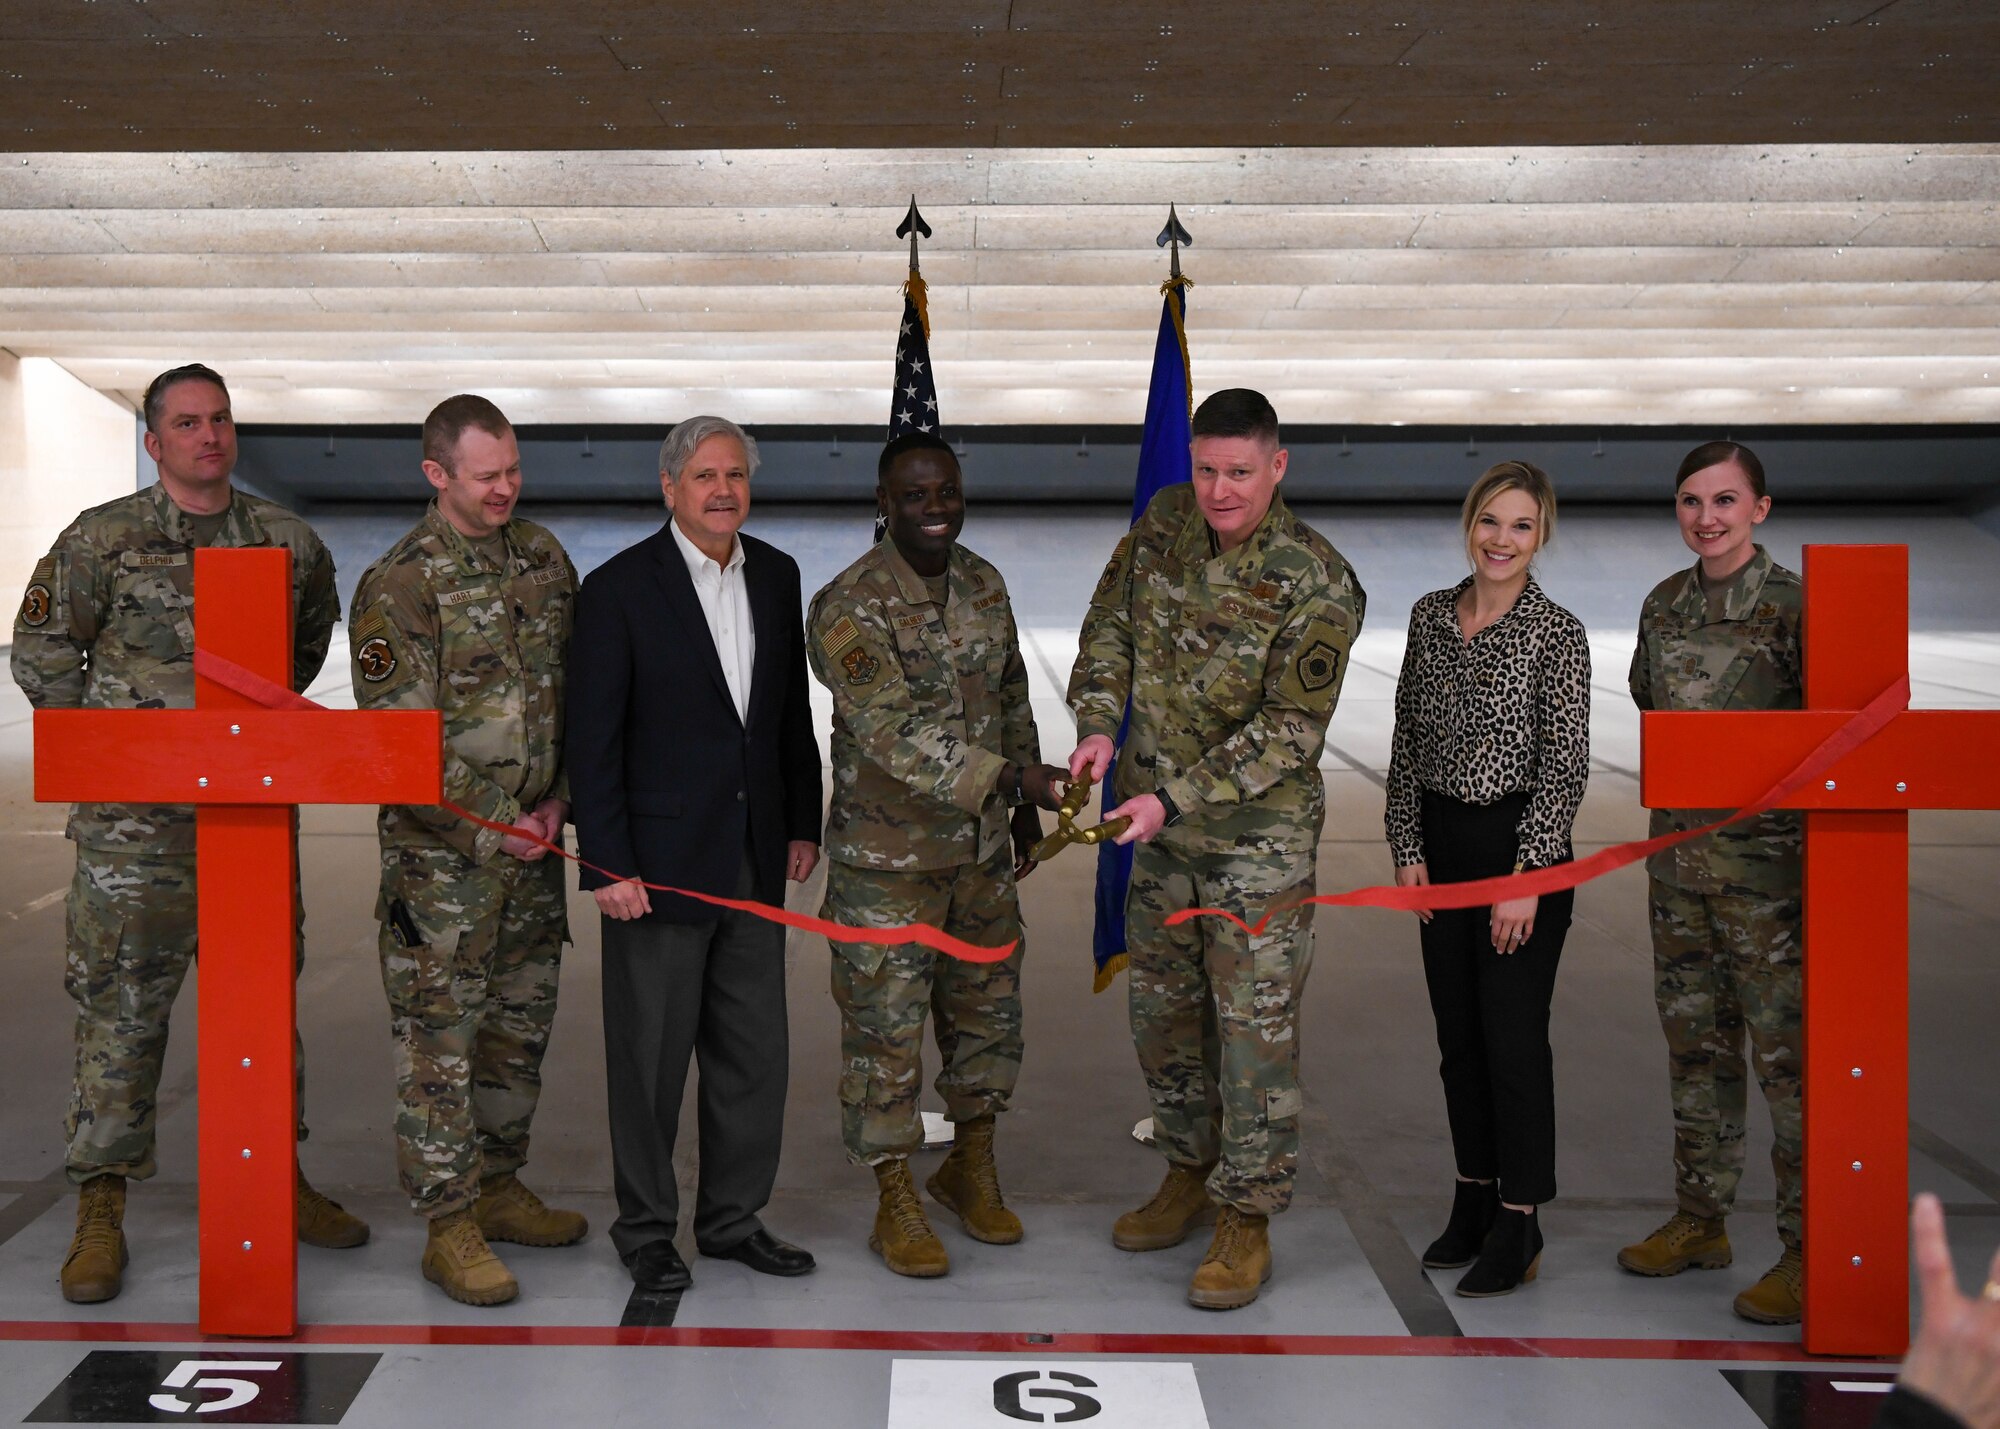 Senator John Hoeven receives tour of the new combat arms building at Minot Air Force Base, North Dakota, April 22, 2022. An average of 8,000 Airmen go through the combat arms building every year to be certified in a variety of different firearms to support either the 5th Bomb Wing or 91st Missile Wing mission of strategic deterrence at the combat arms building. (U.S. Air Force photo by Airman 1st Class Evan J. Lichtenhan)